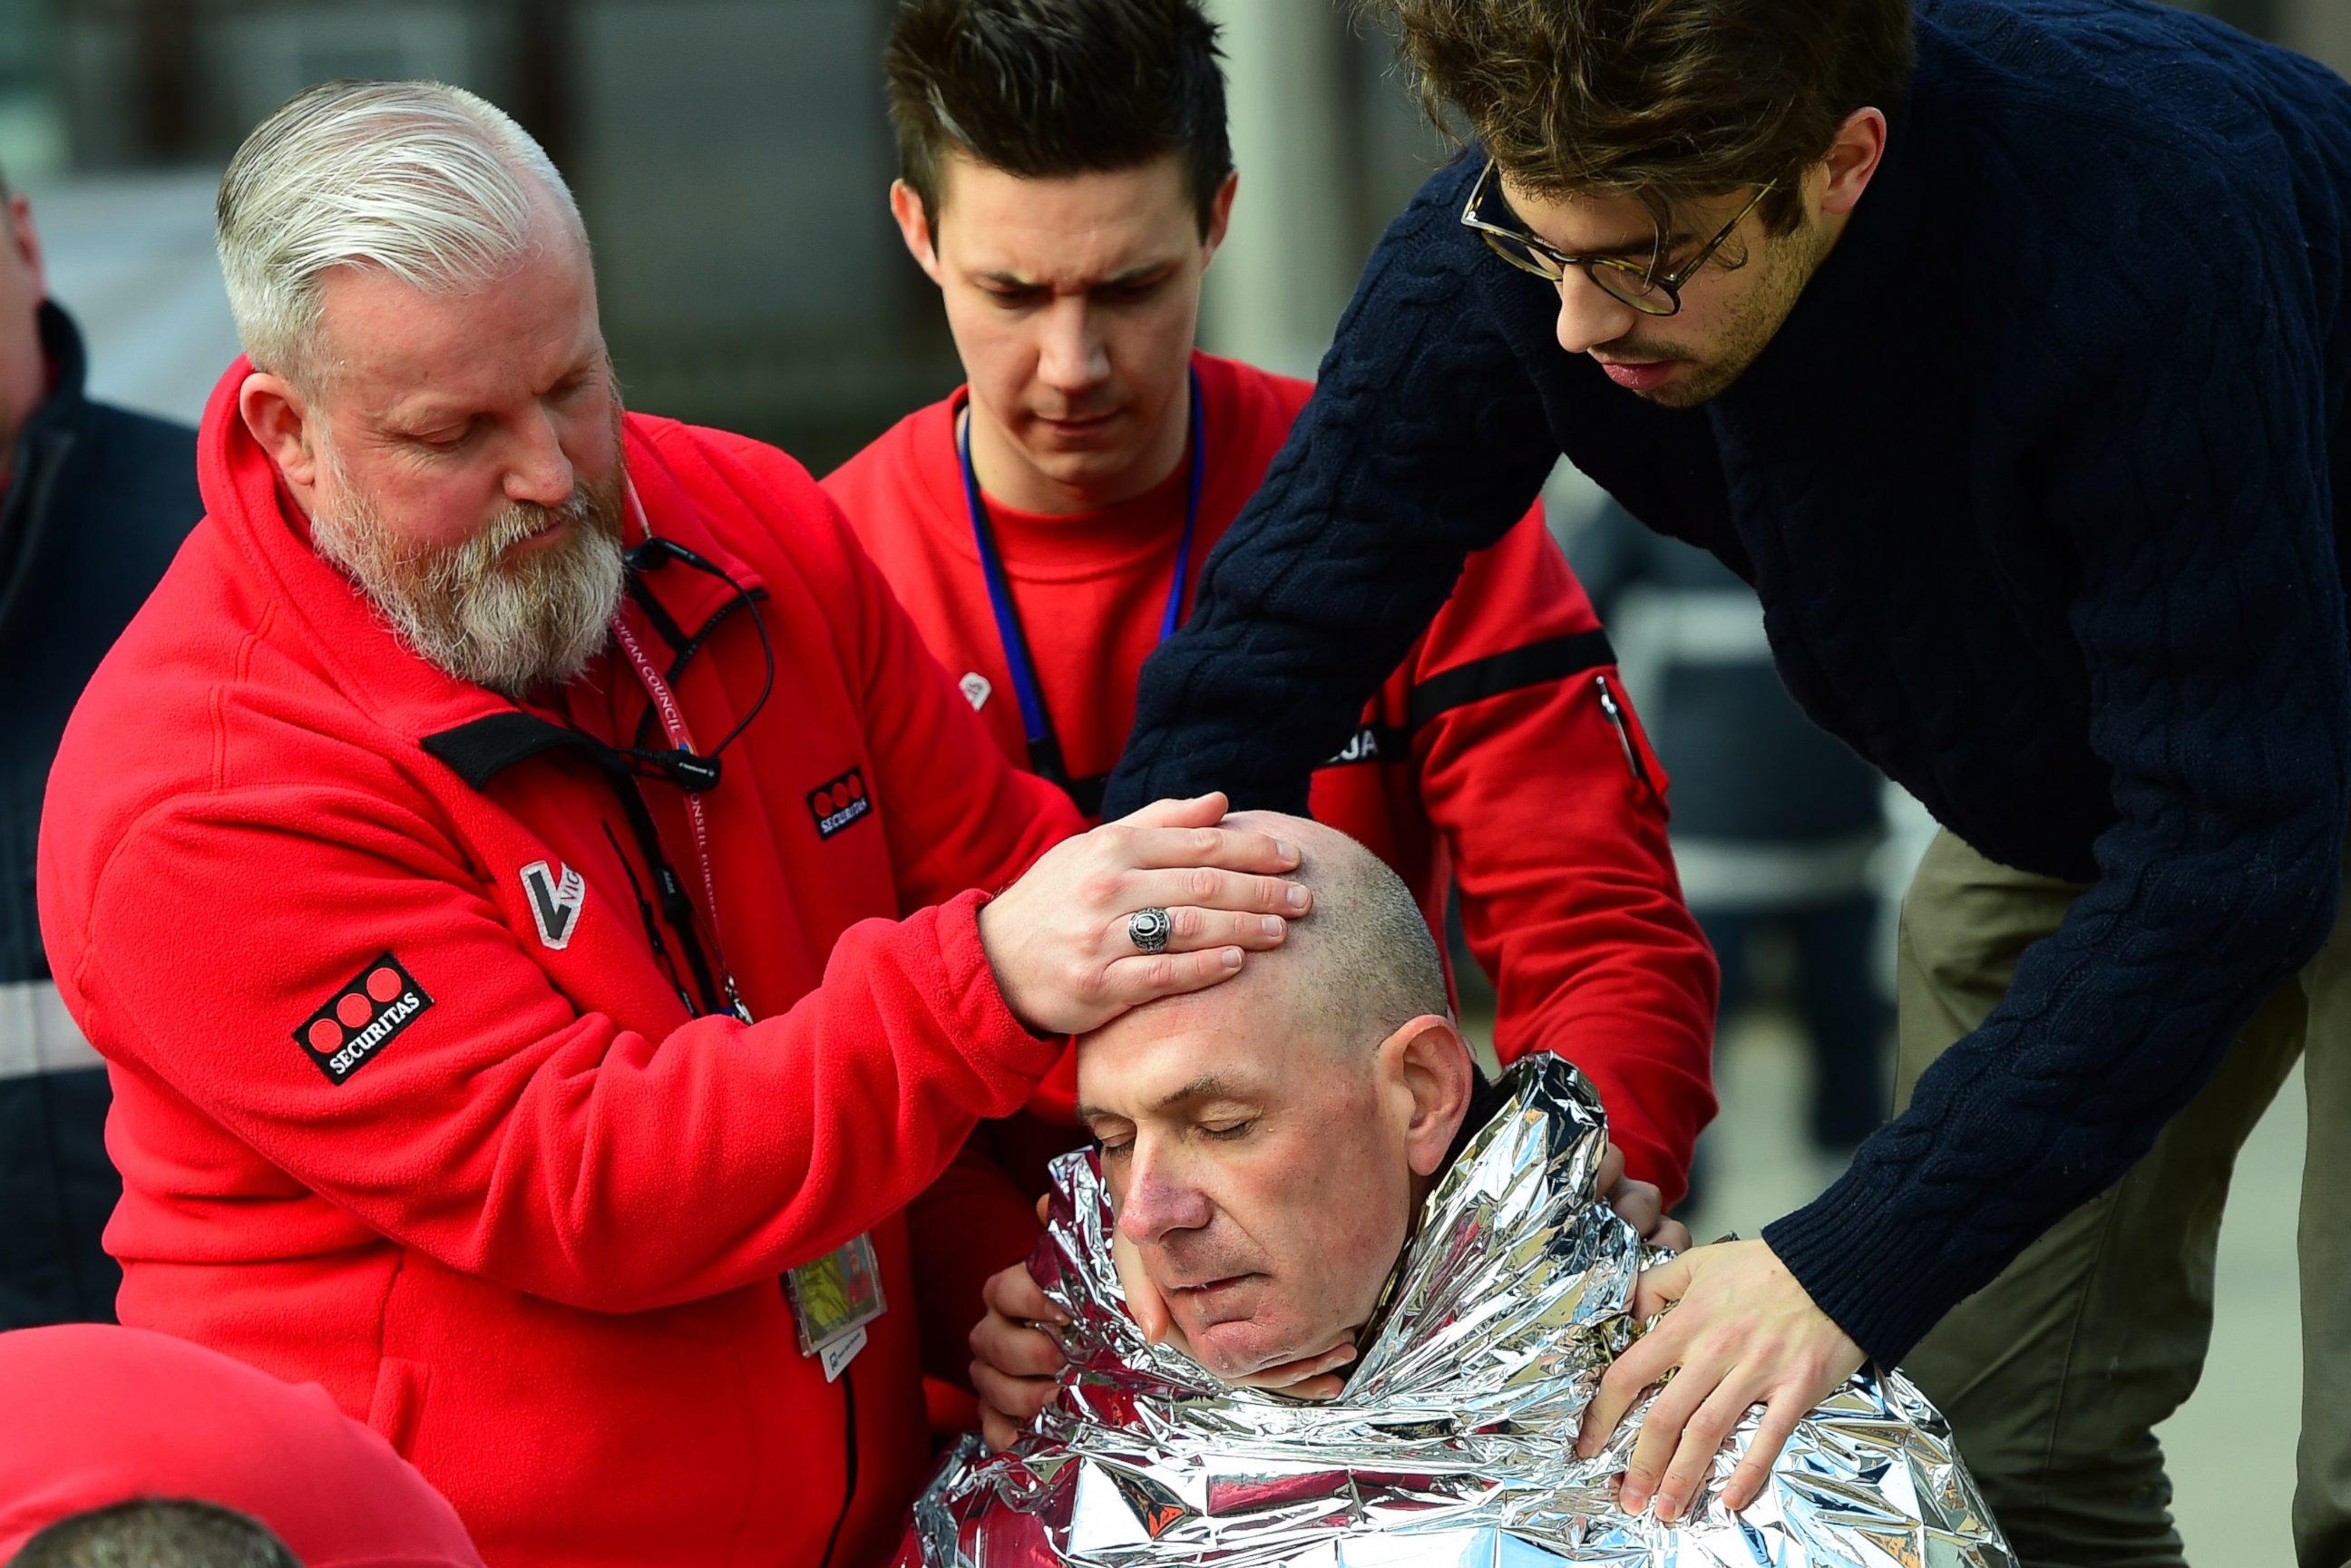 PHOTO: A victim receives first aid on March 22, 2016 near Maalbeek metro station in Brussels, after a blast at this station near the EU institutions caused deaths and injuries.